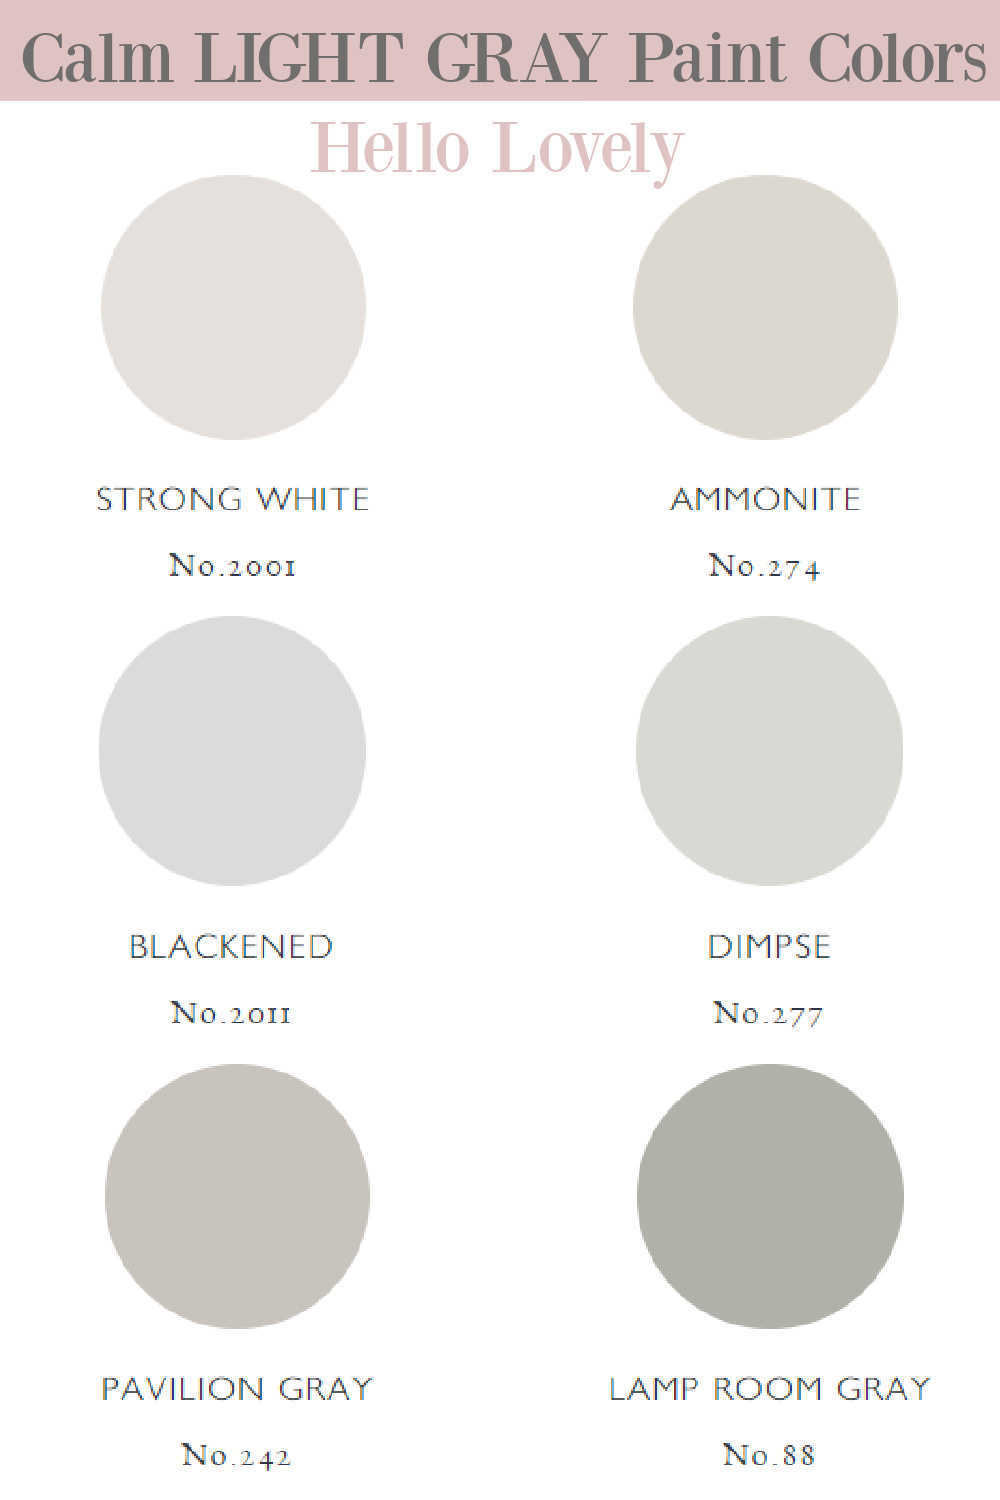 Calm light gray paint colors to try from Farrow & Ball - Hello Lovely Studio. #graypaintcolors #greypaint #lightgray